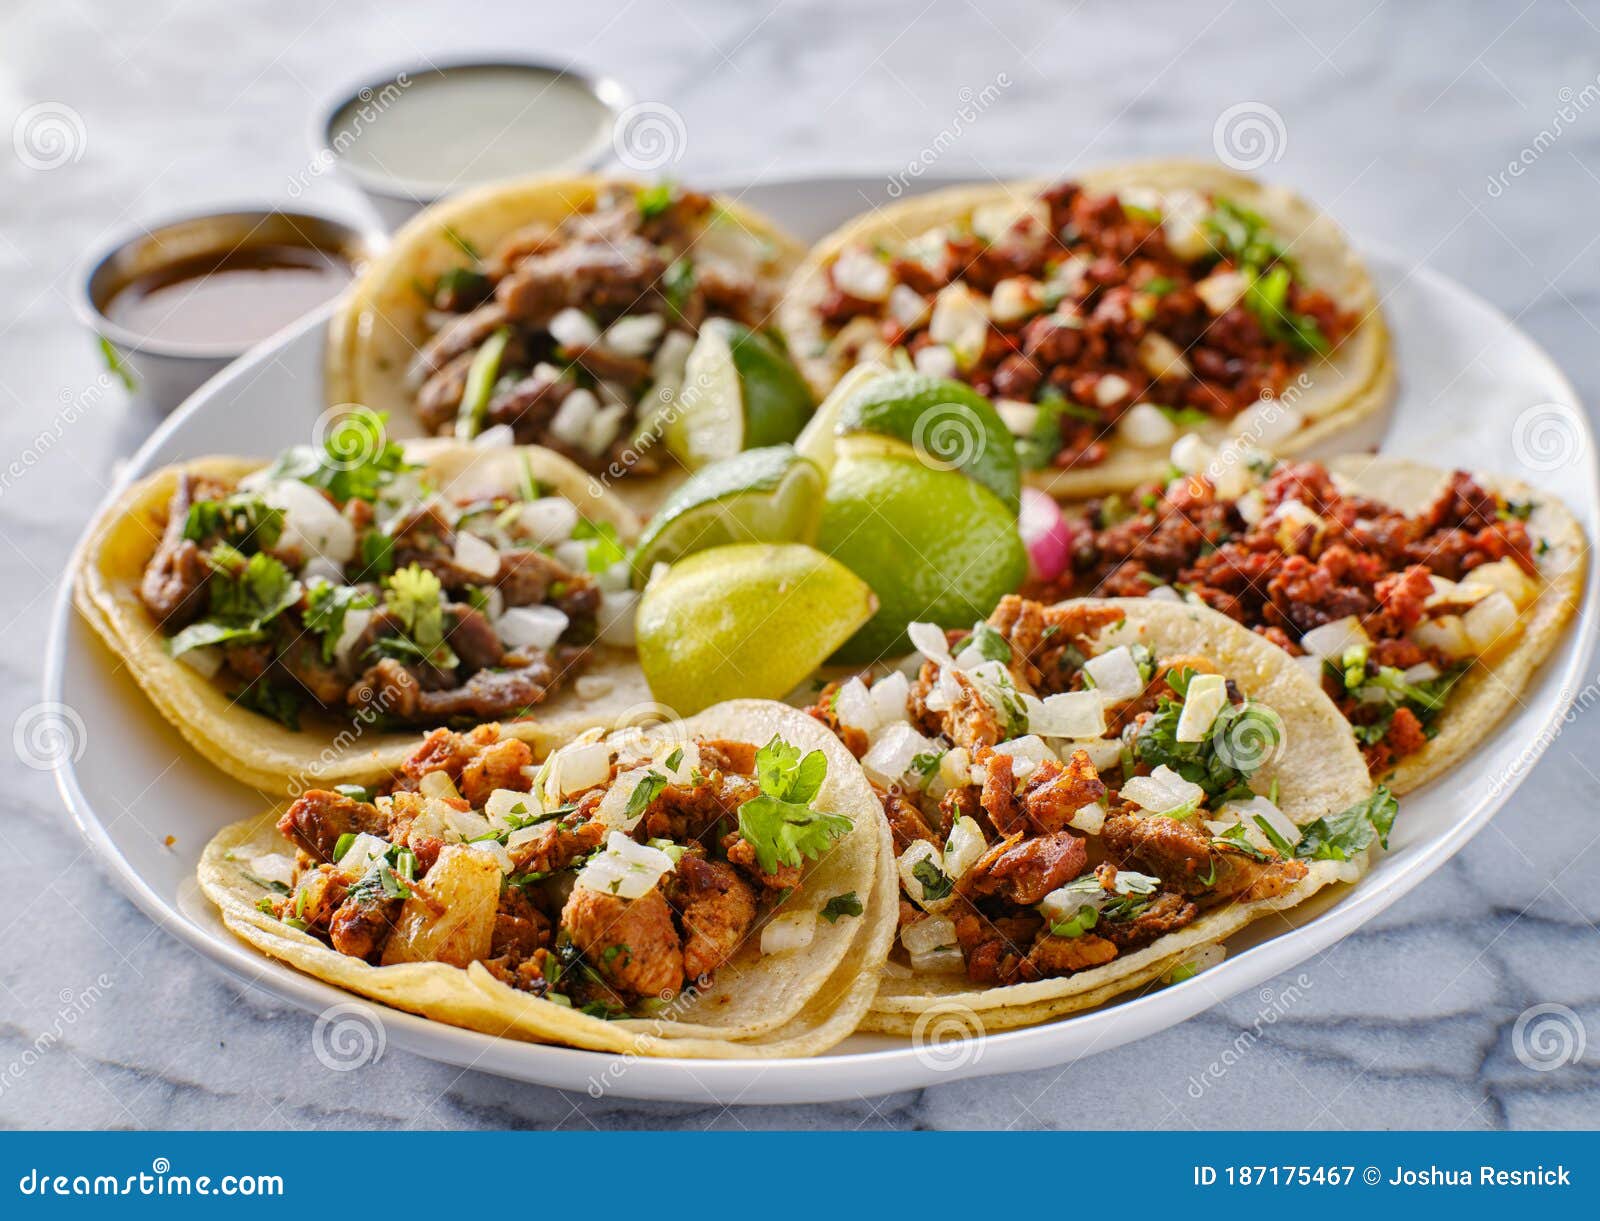 platter of mexican street tacos with carne asada, chorizo, and al pastor in corn tortillas